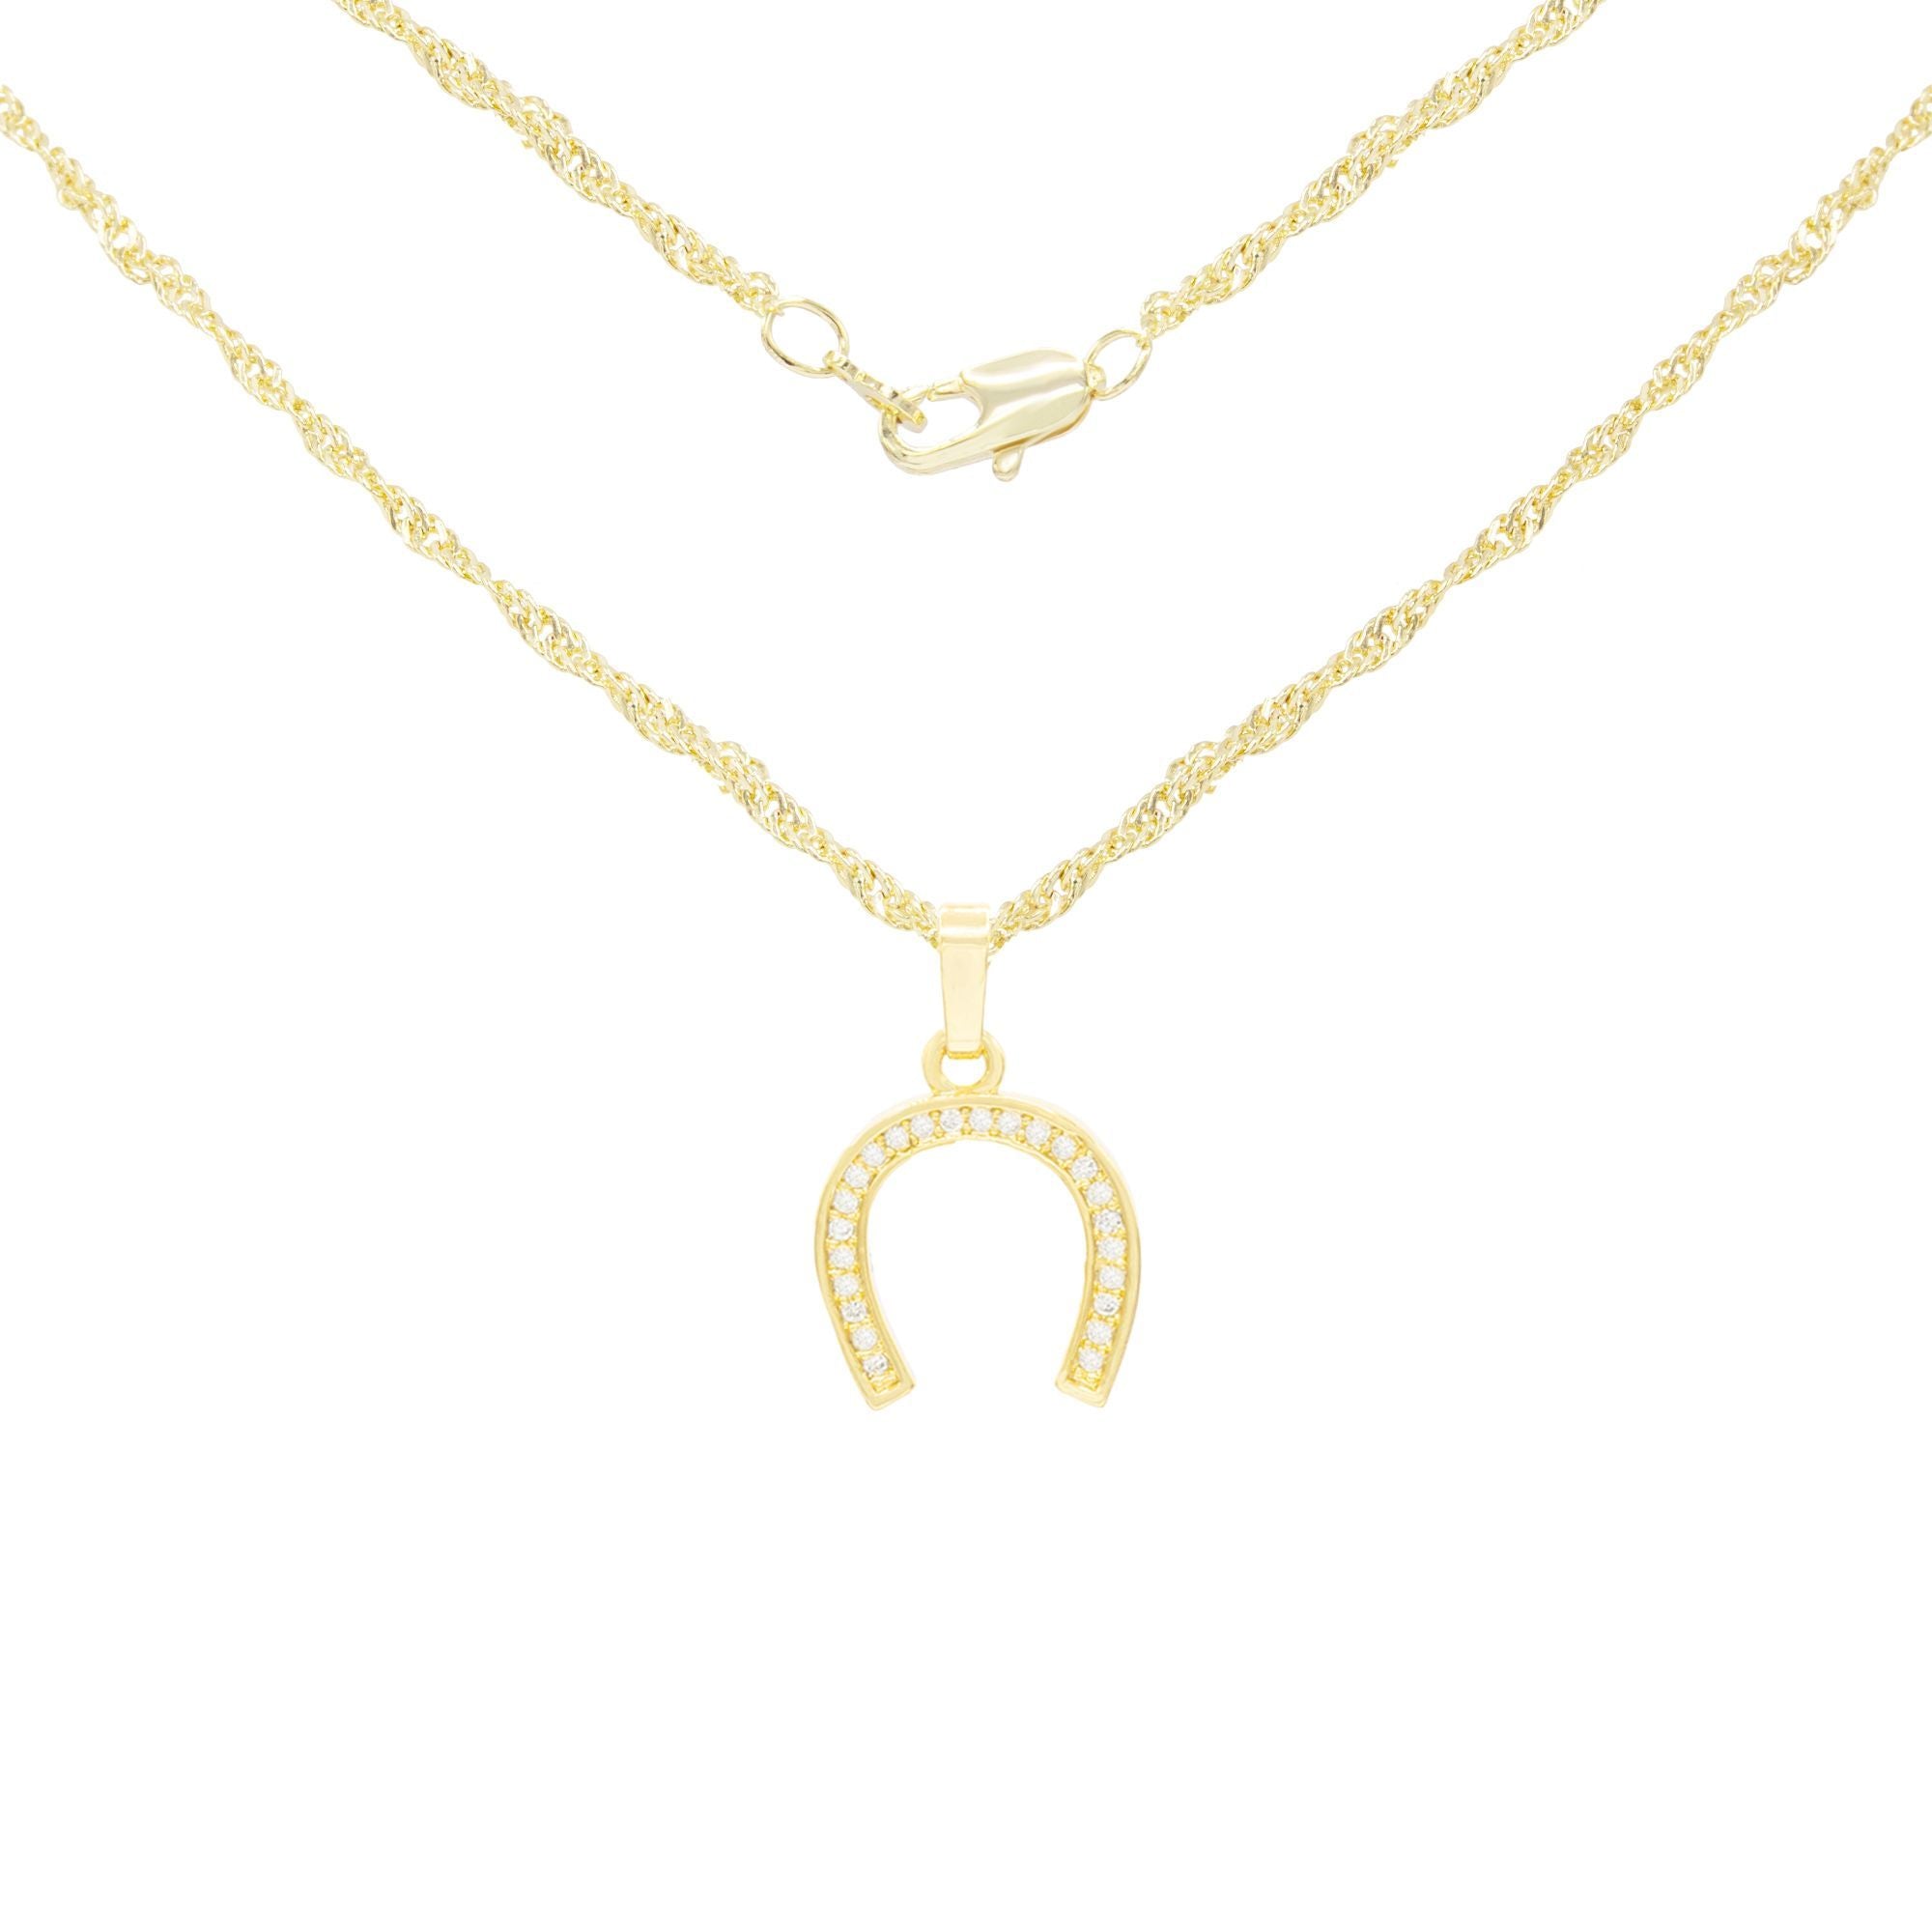 Horse Shoe Cubic Zirconia Pendant With Necklace Set 14K Gold Filled